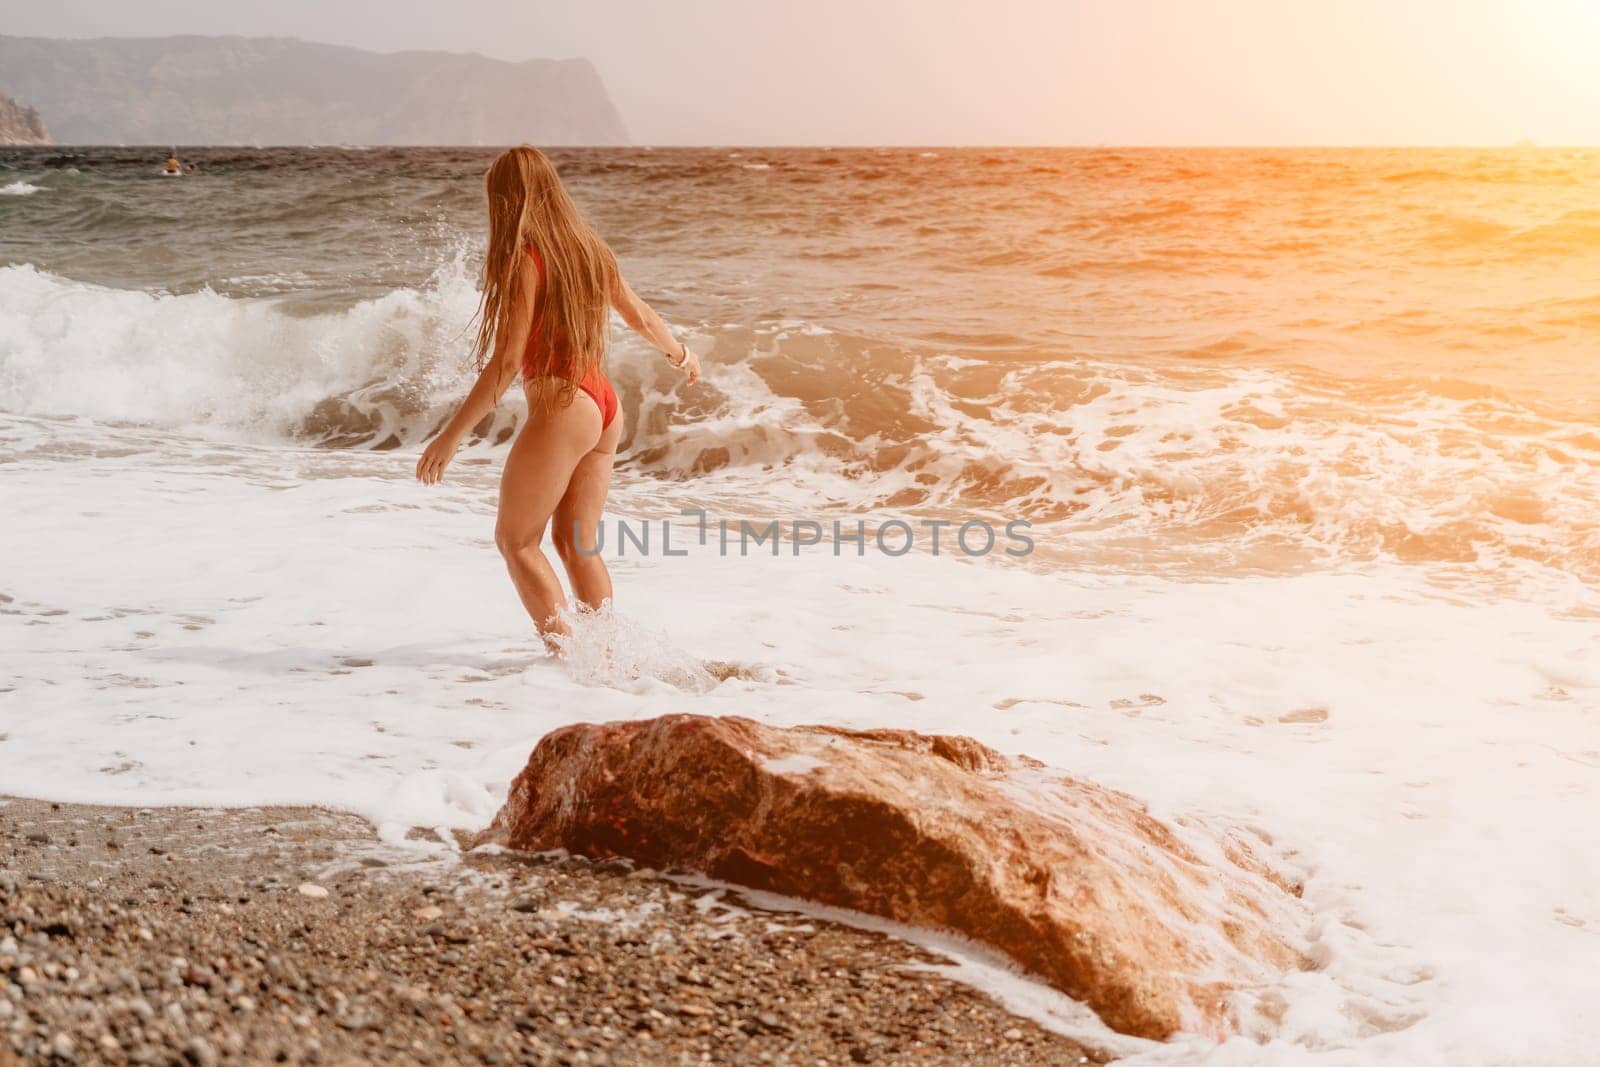 Woman summer travel sea. Happy tourist in red bikini enjoy taking picture outdoors for memories. Woman traveler posing on beach at sea surrounded by volcanic mountains, sharing travel adventure joy by panophotograph